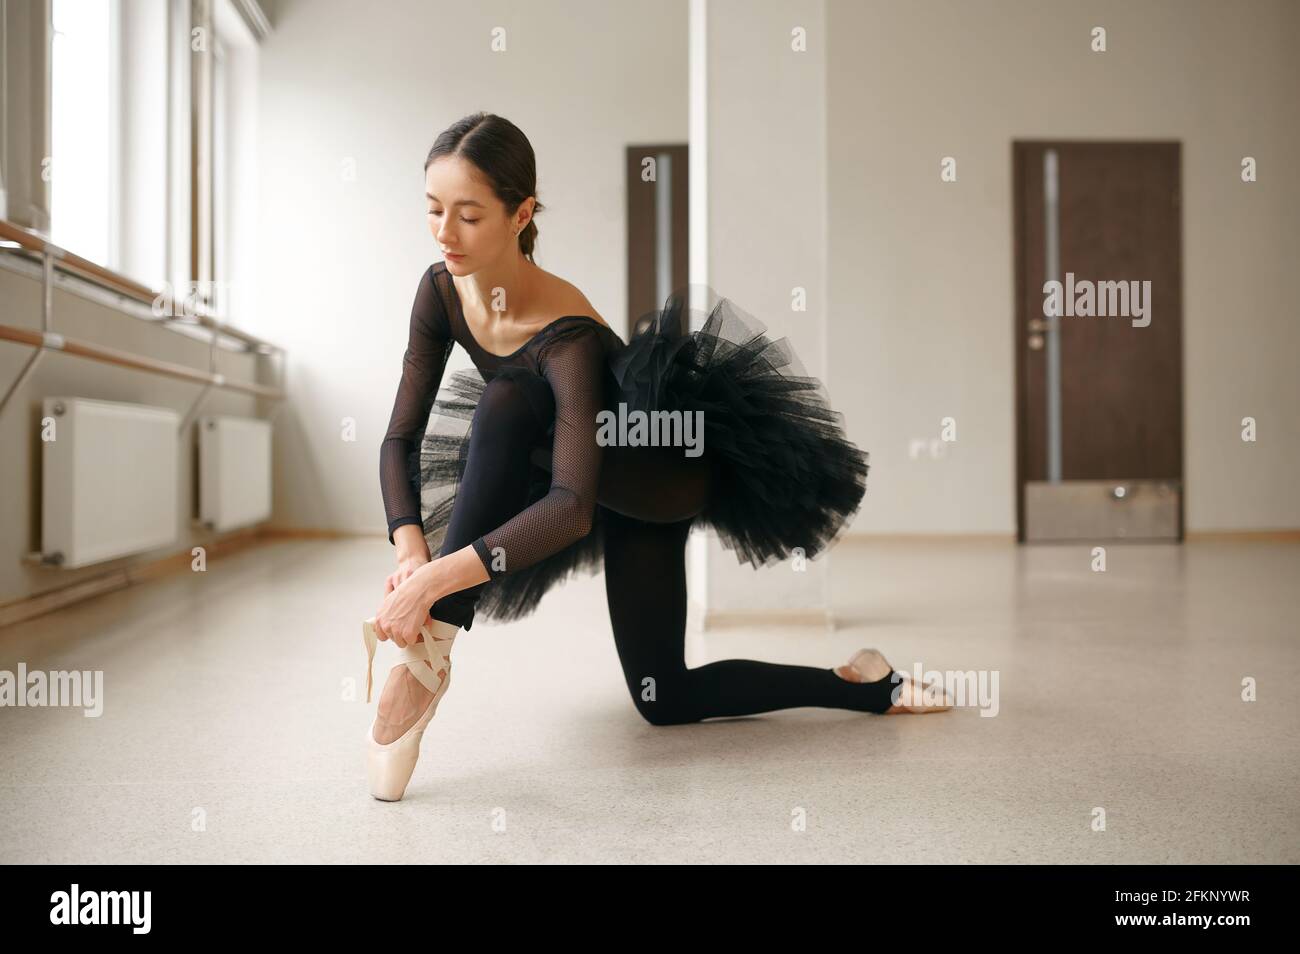 Ballerina doing stretching exercise in class Stock Photo